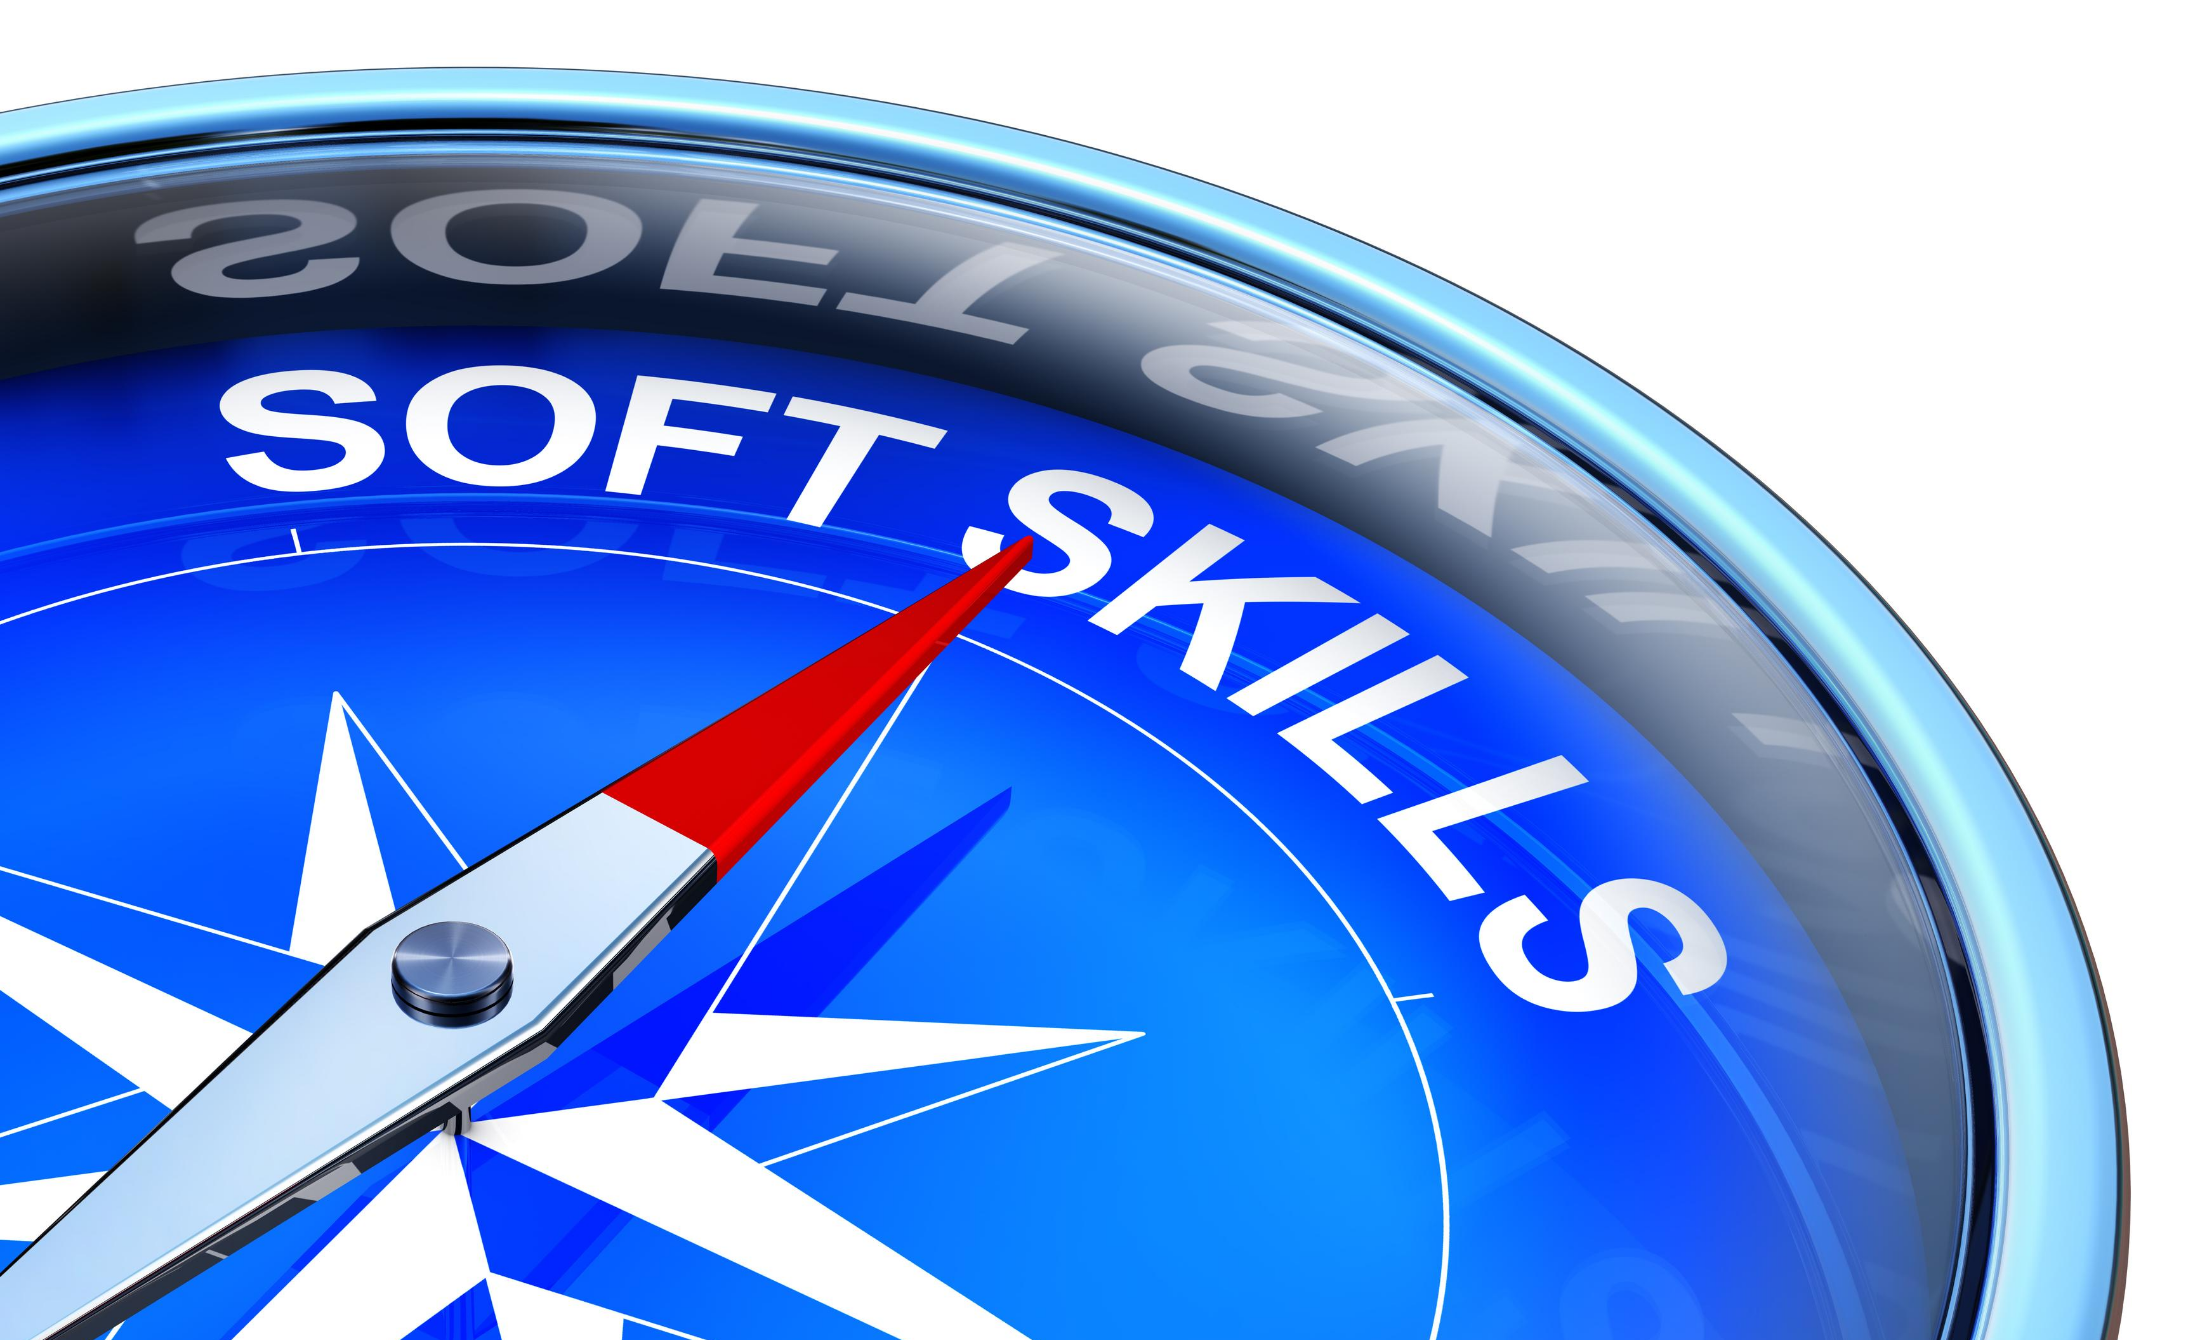 WHAT ARE SOFT SKILLS?